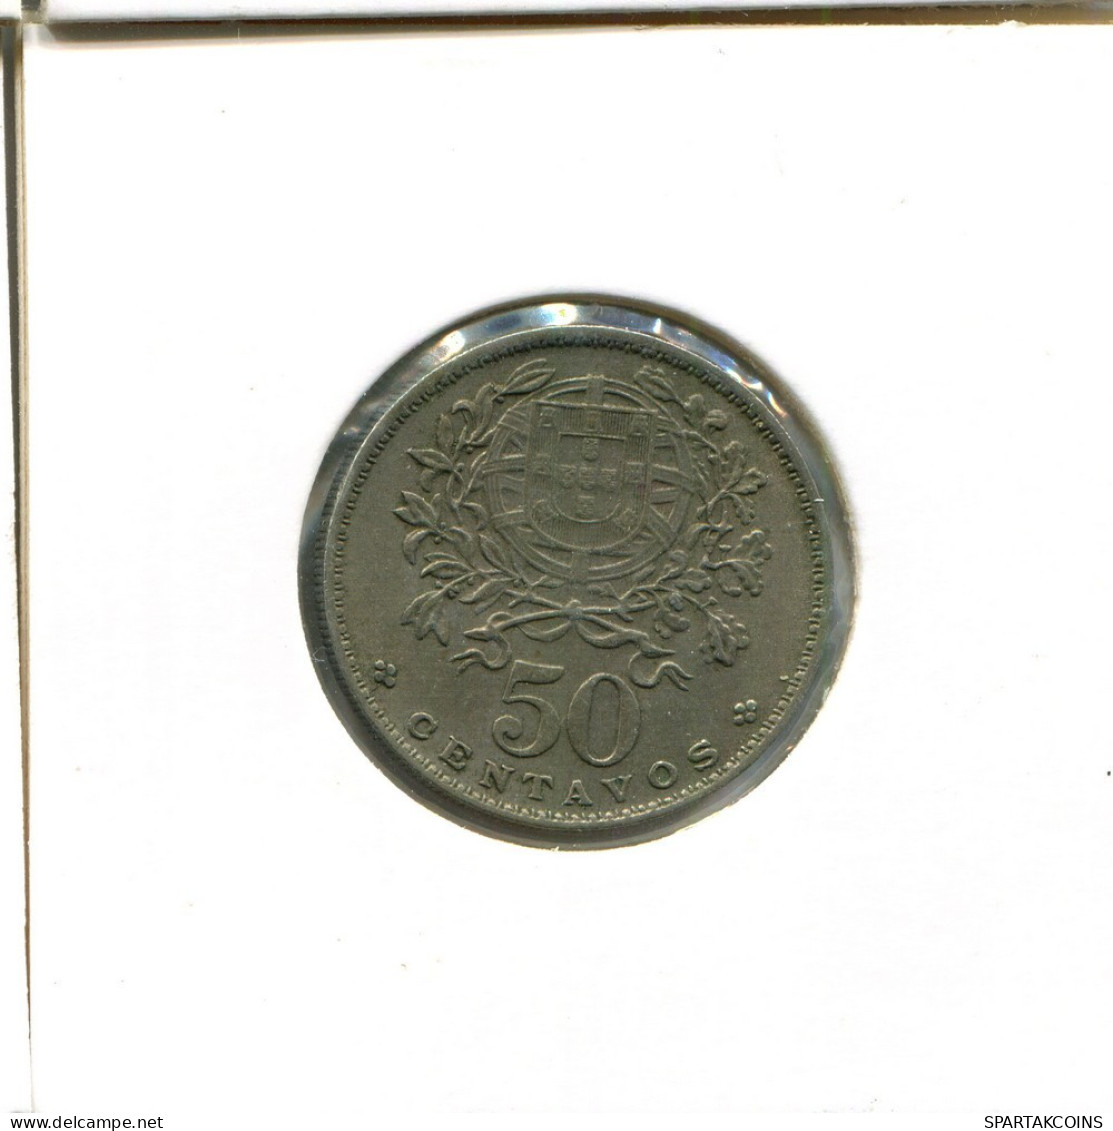 50 CENTAVOS 1962 PORTUGAL Münze #AT300.D.A - Portugal